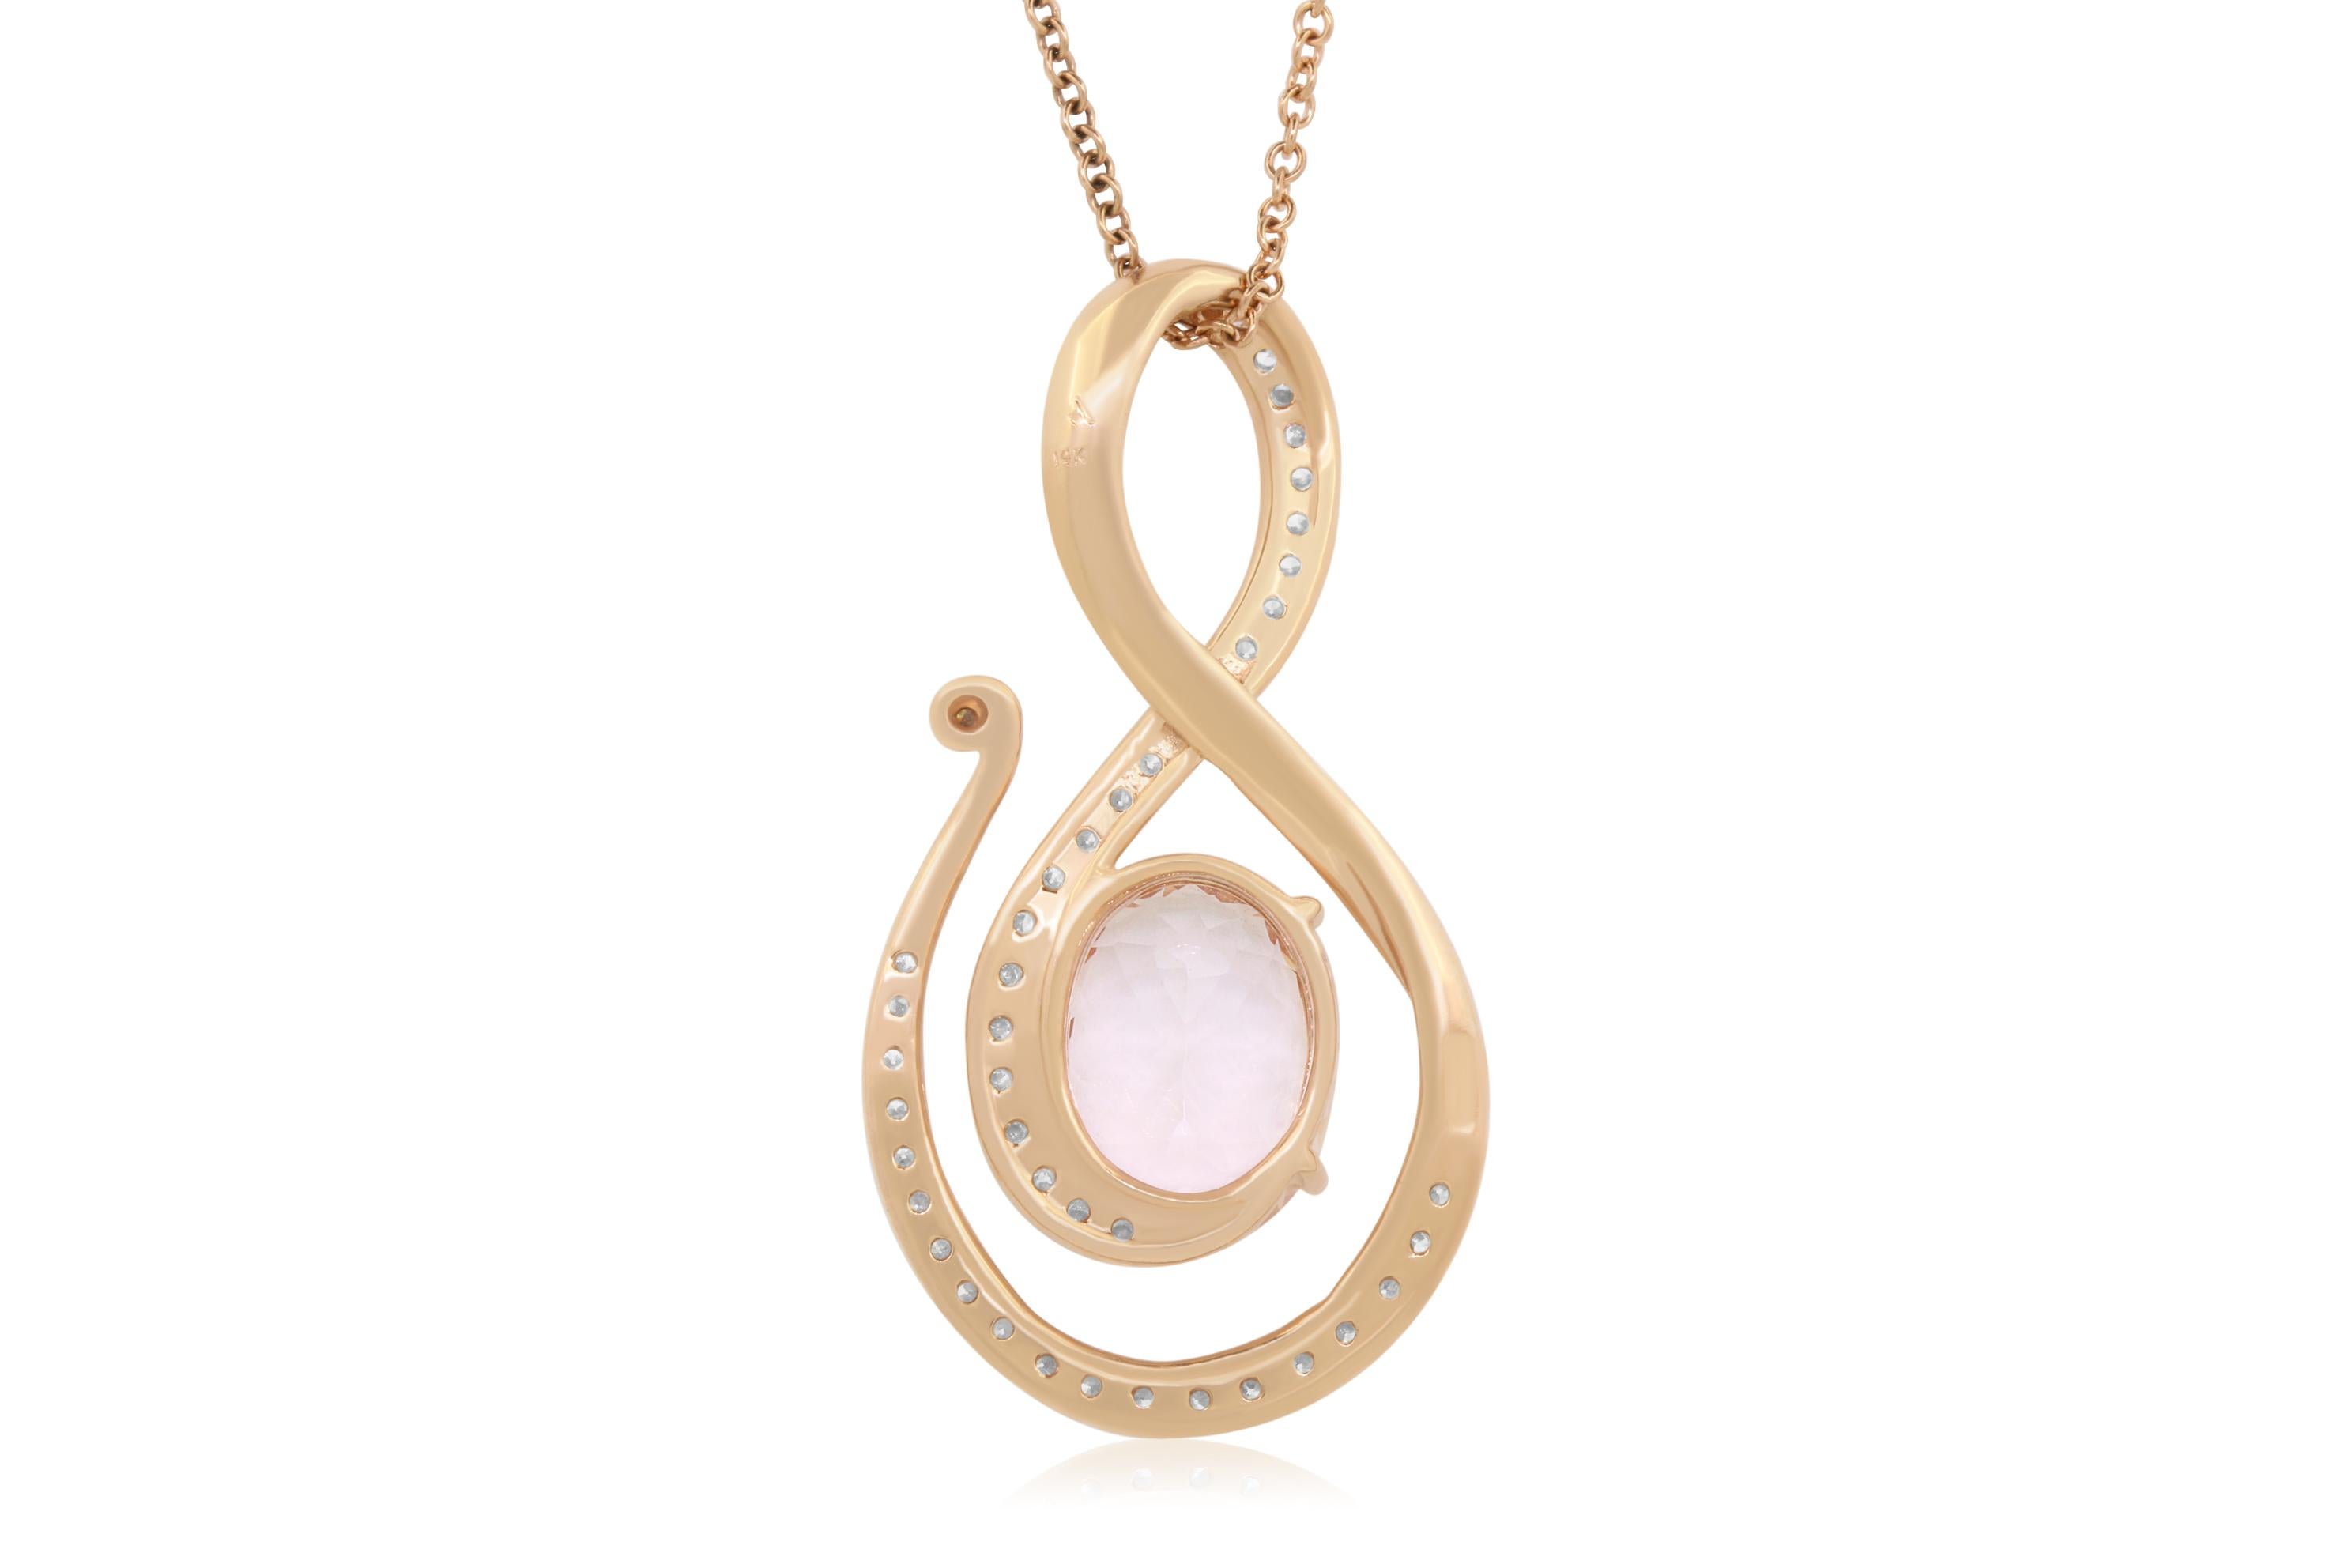 Material: 14k Rose Gold 
Center Stone Details: 7.45 Carat Oval Shaped Pink Morganite - 14.3 x 11.3 mm
Diamonds:  44 Round Diamonds at 1.00 Carats.  SI Quality /  H-I Color
Chain:  18 inch

Fine one-of-a kind craftsmanship meets incredible quality in